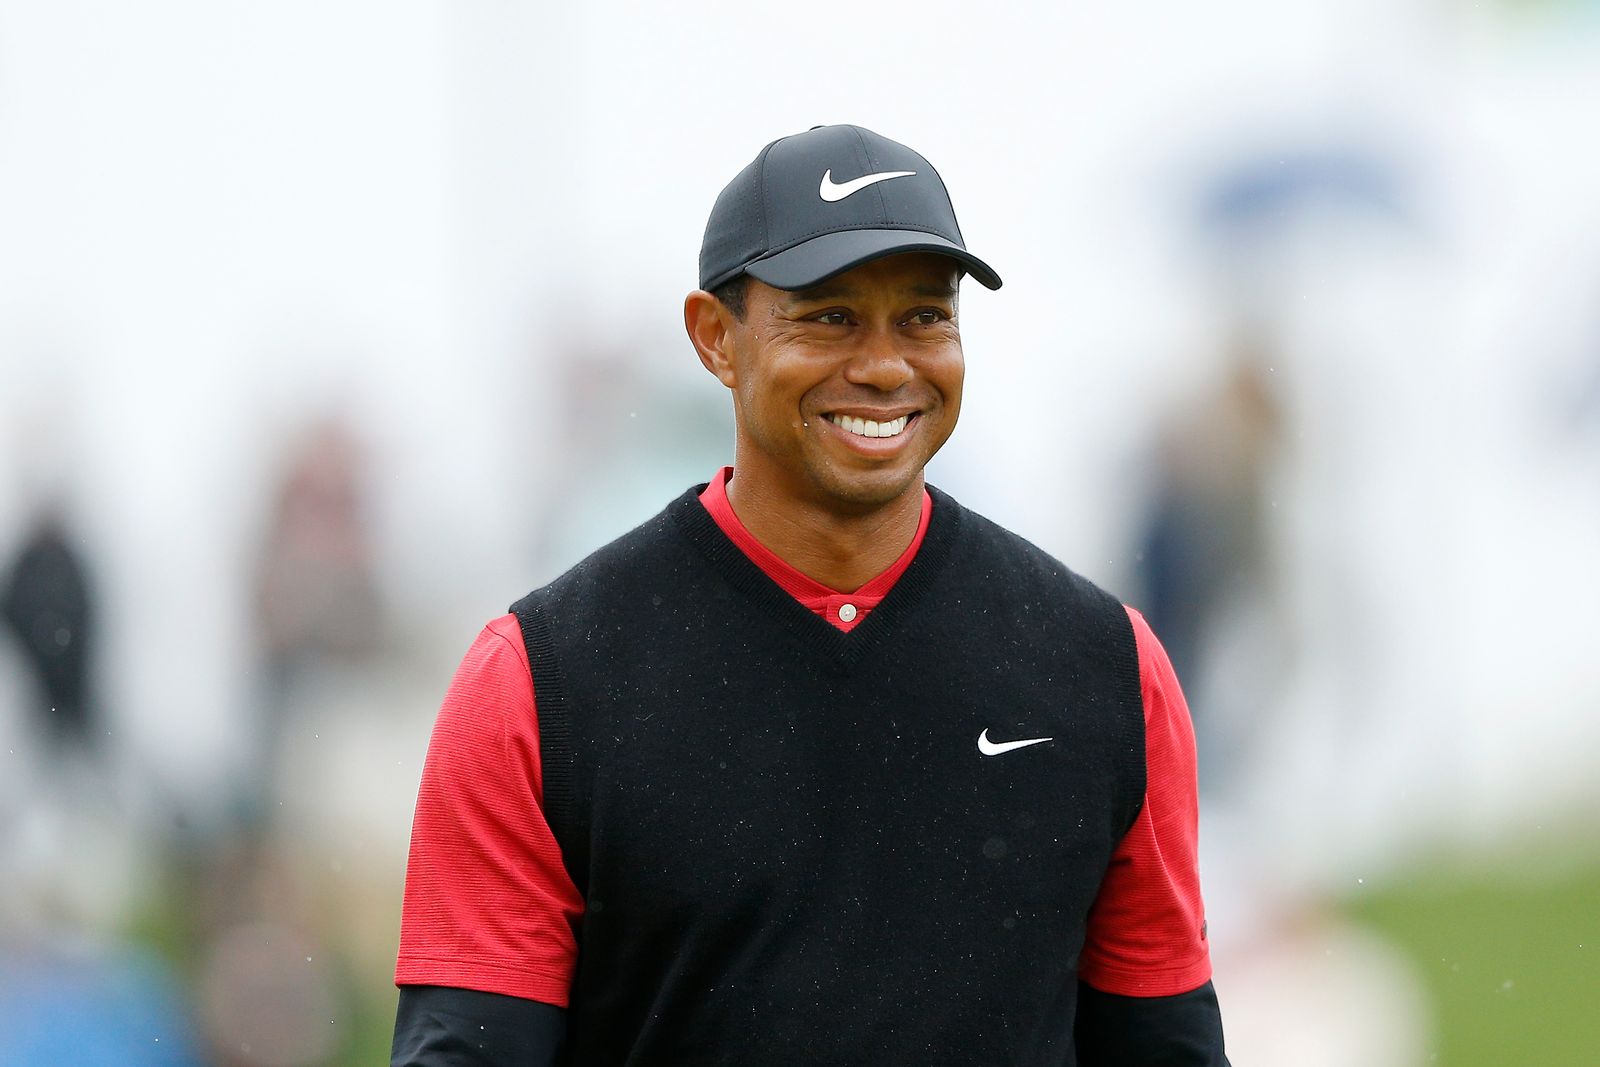 Tiger Woods reacts after chipping in from the bunker on the third hole during the final round of The PLAYERS Championship at TPC Sawgrass on March 17, 2019 in Ponte Vedra Beach, Florida. | Source: Getty Images